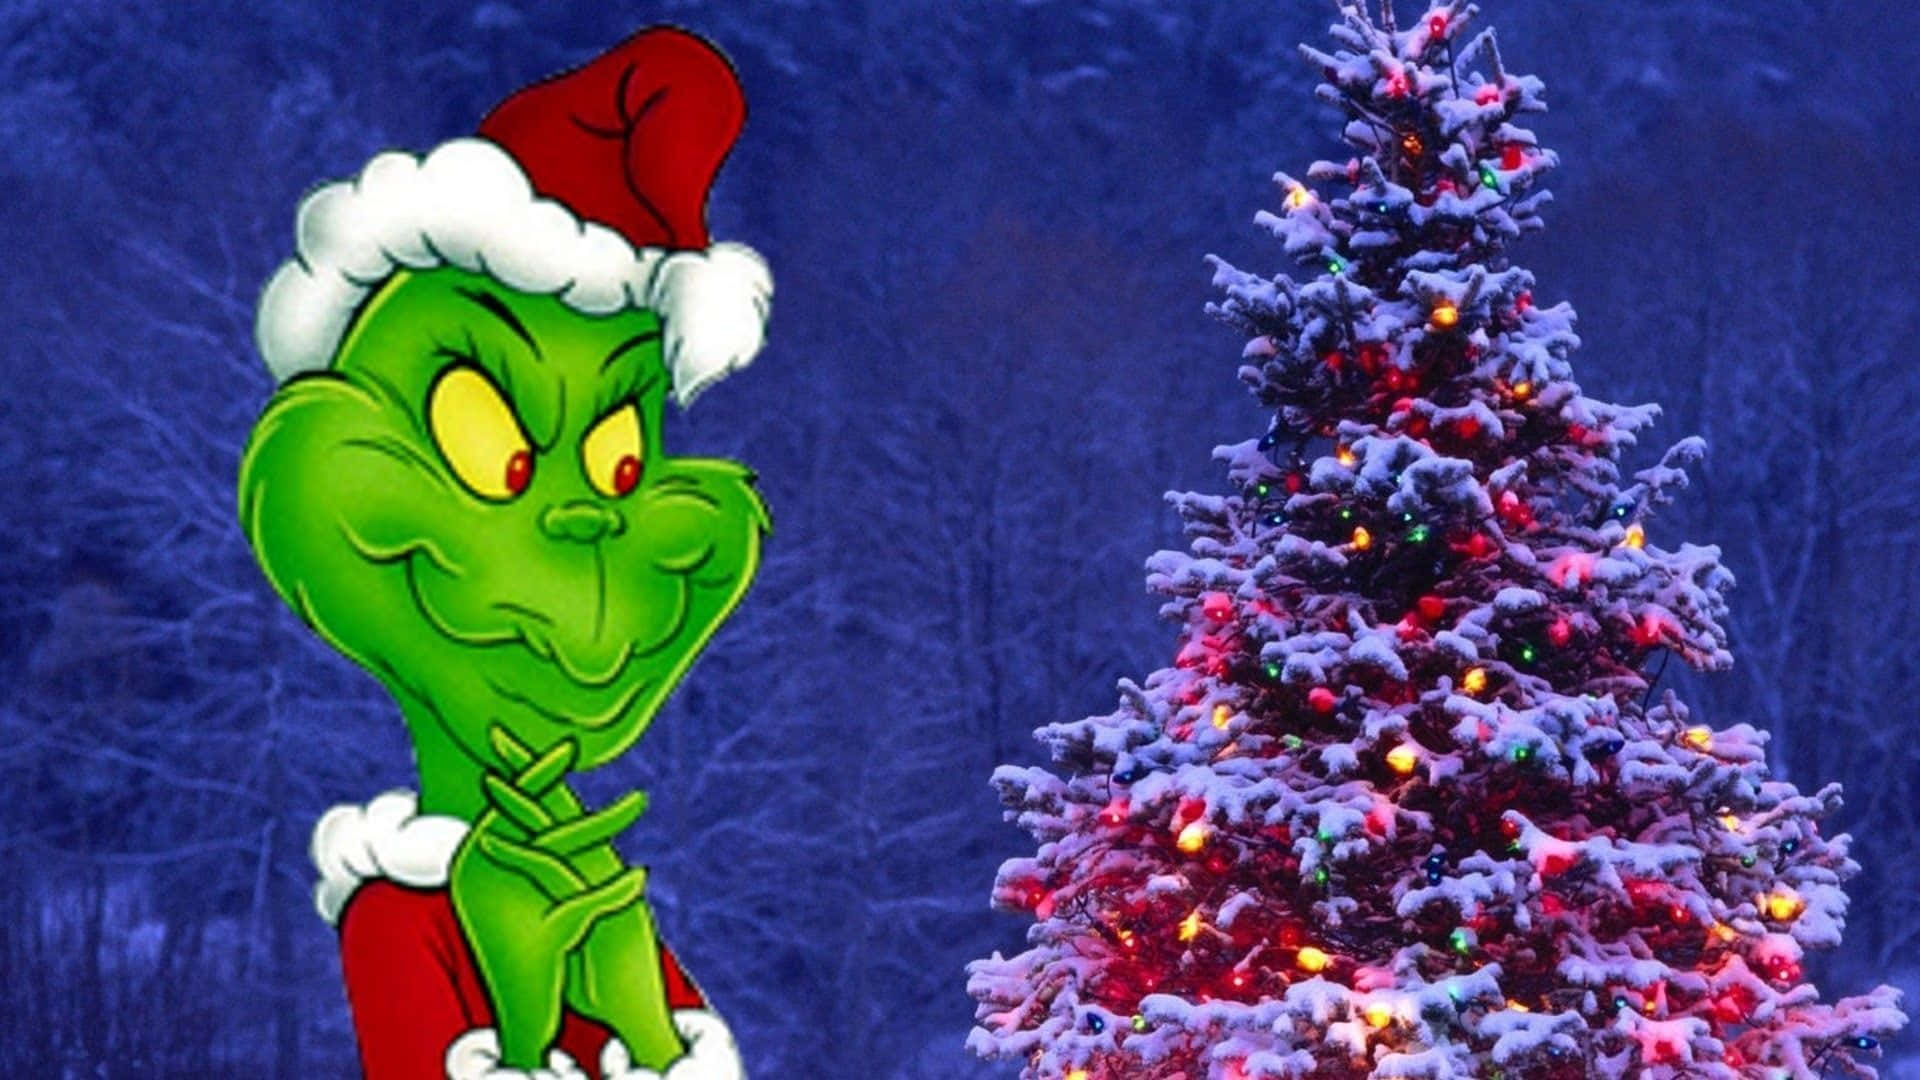 Image Celebrate The Holidays With A Smile As The Infamous Christmas Grinch Brings Joy And Laughter This Holiday Season. Background